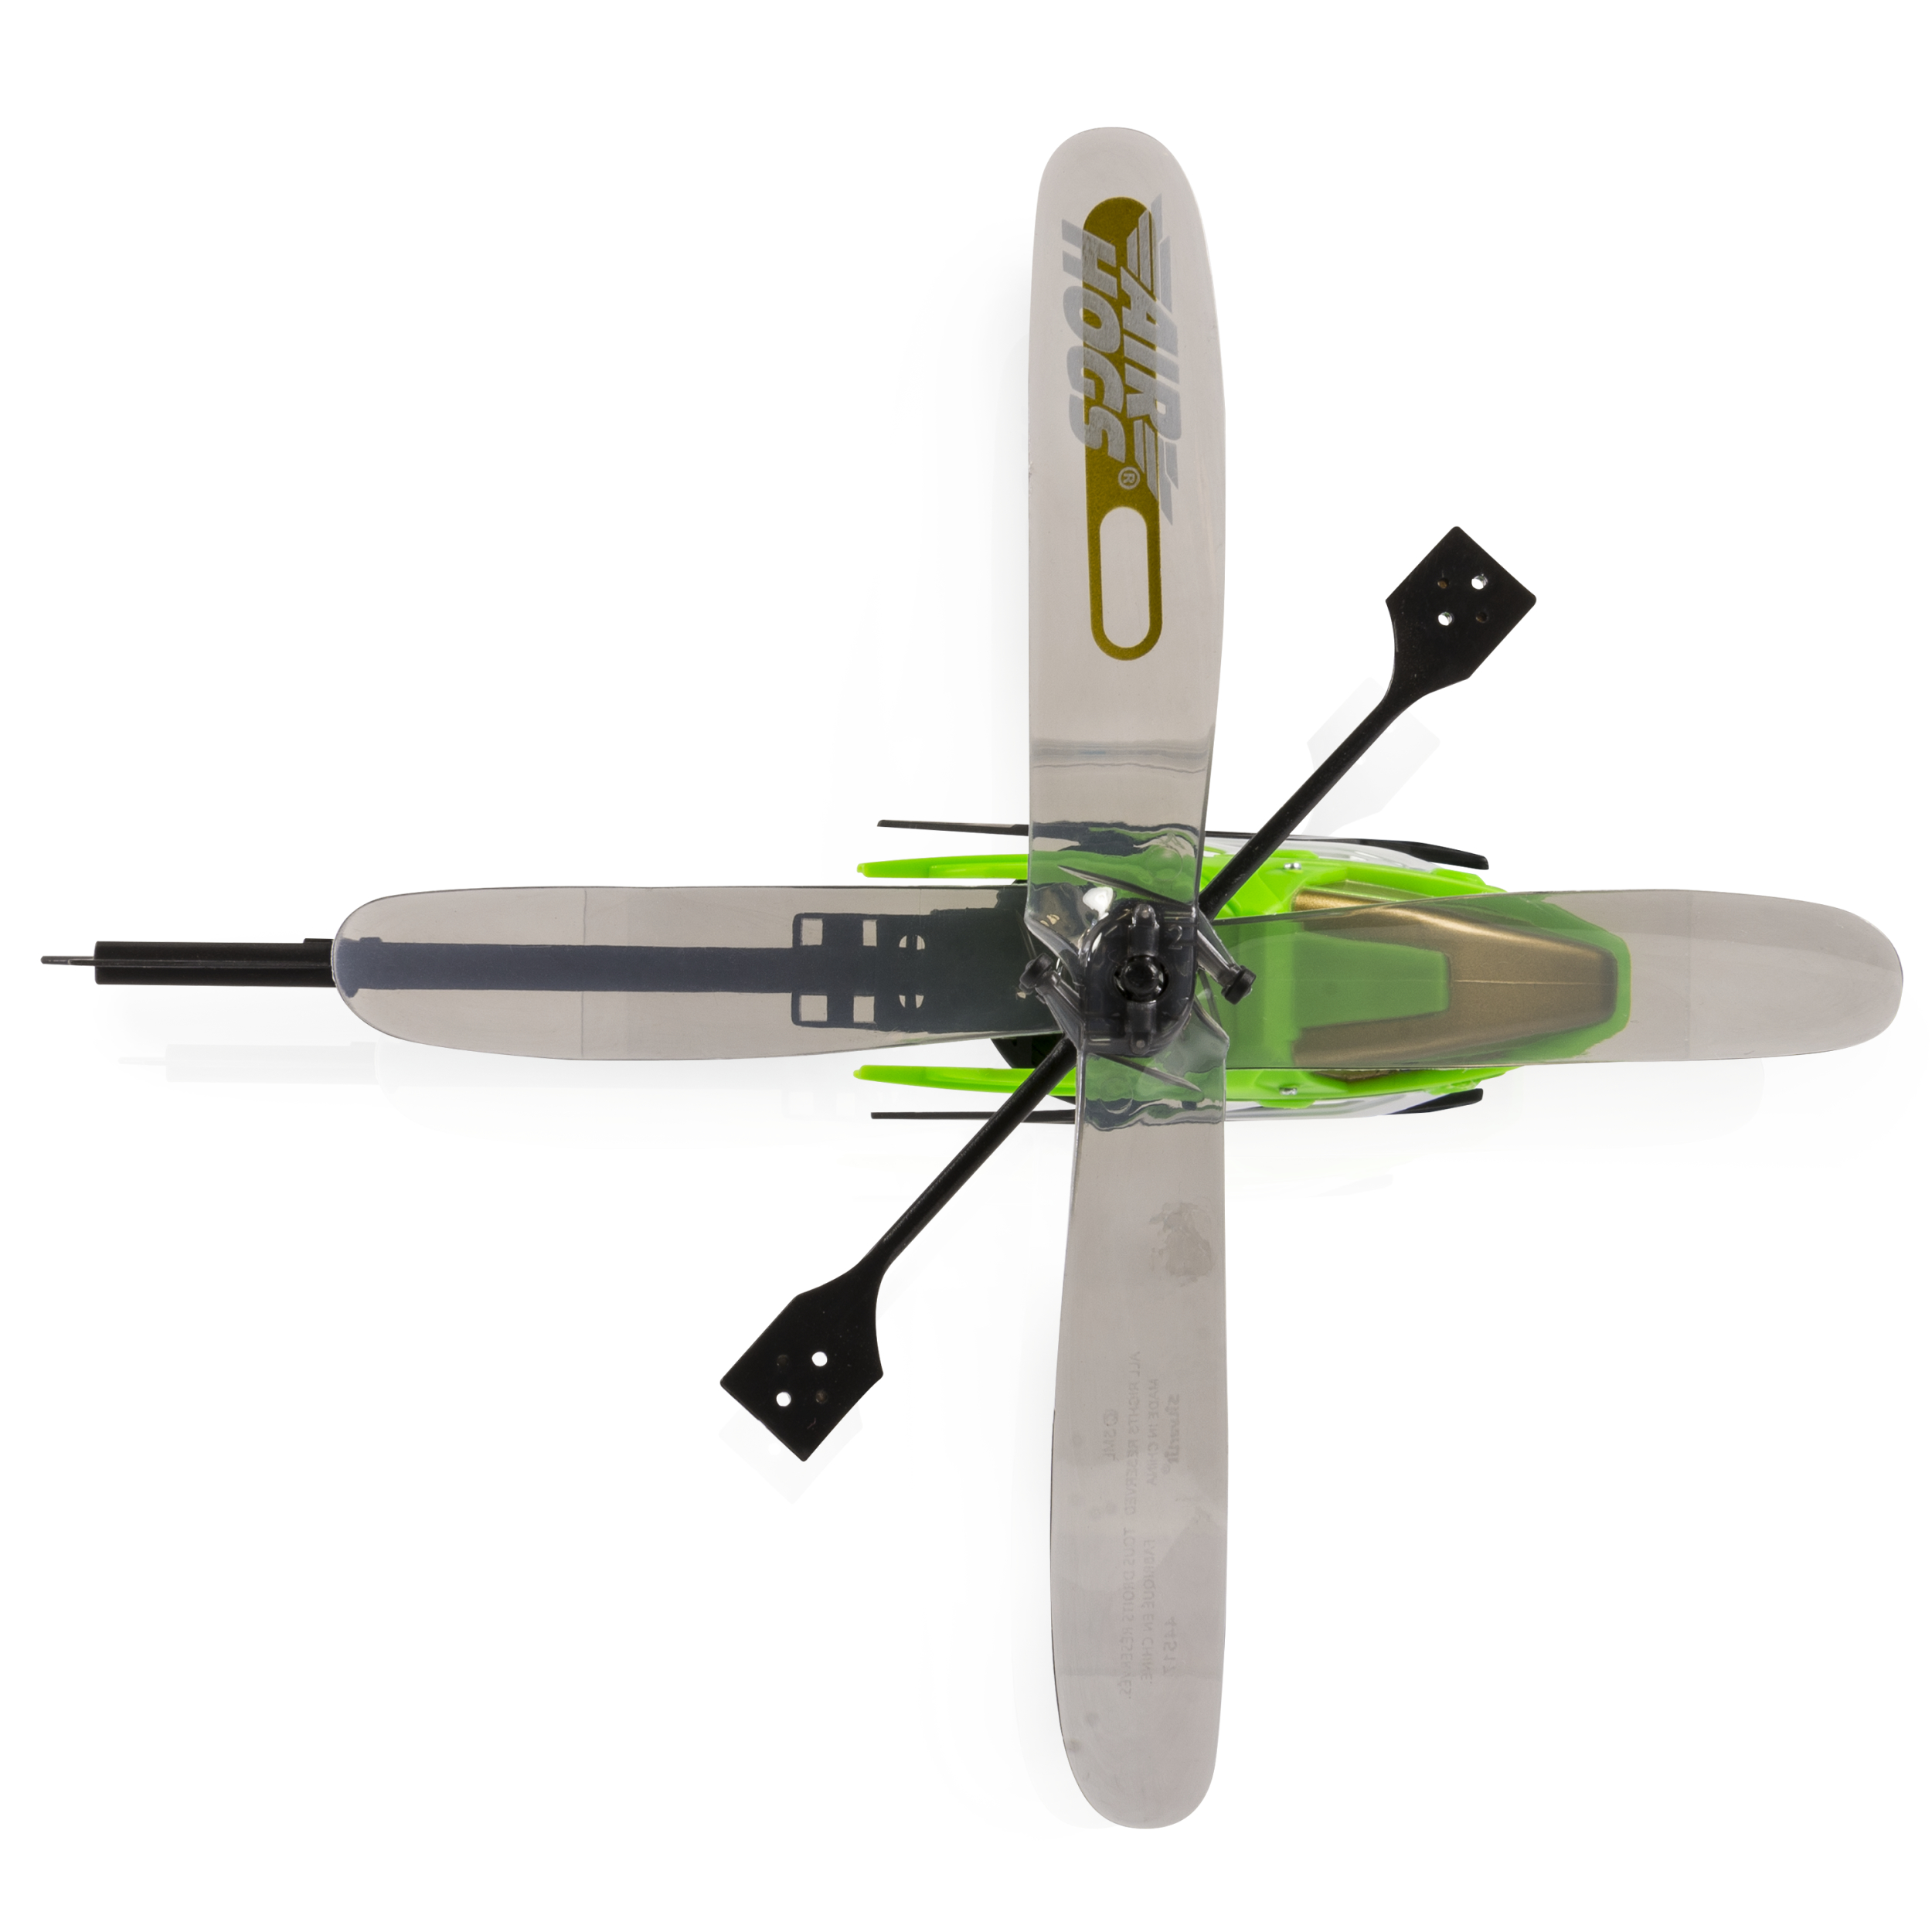 Air Hogs Axis 200 R/C Helicopter with Batteries, Green - image 5 of 6